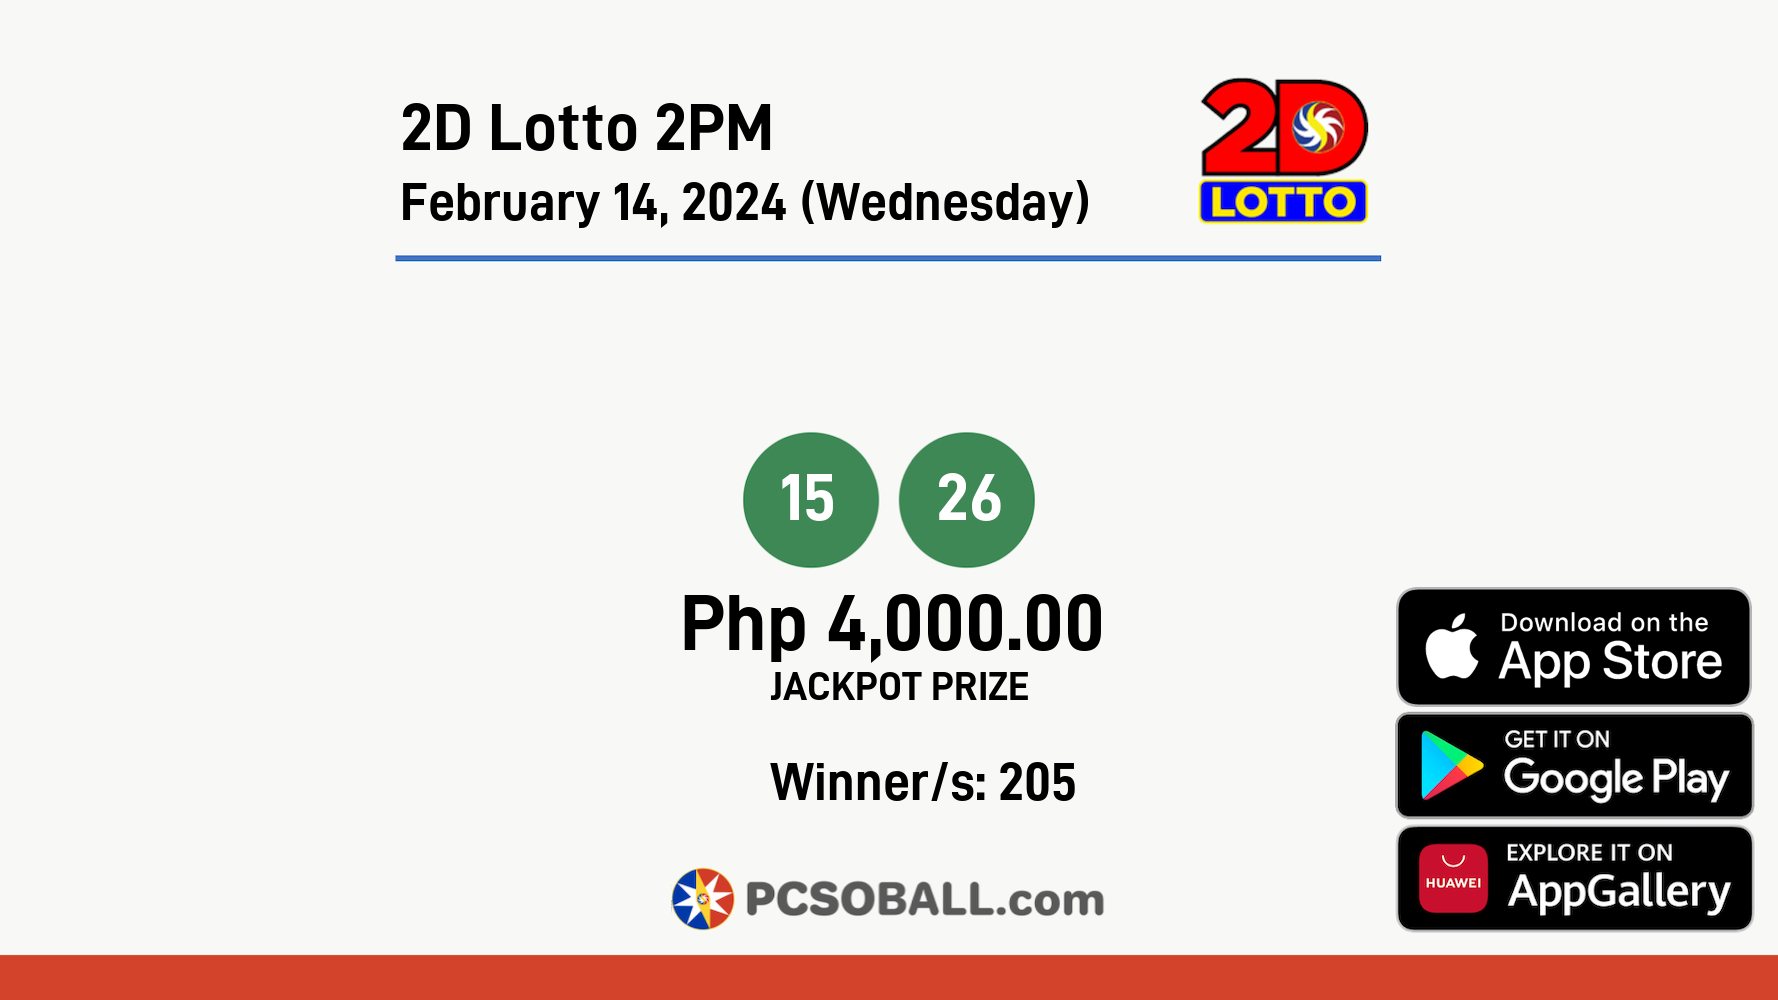 2D Lotto 2PM February 14, 2024 (Wednesday) Result